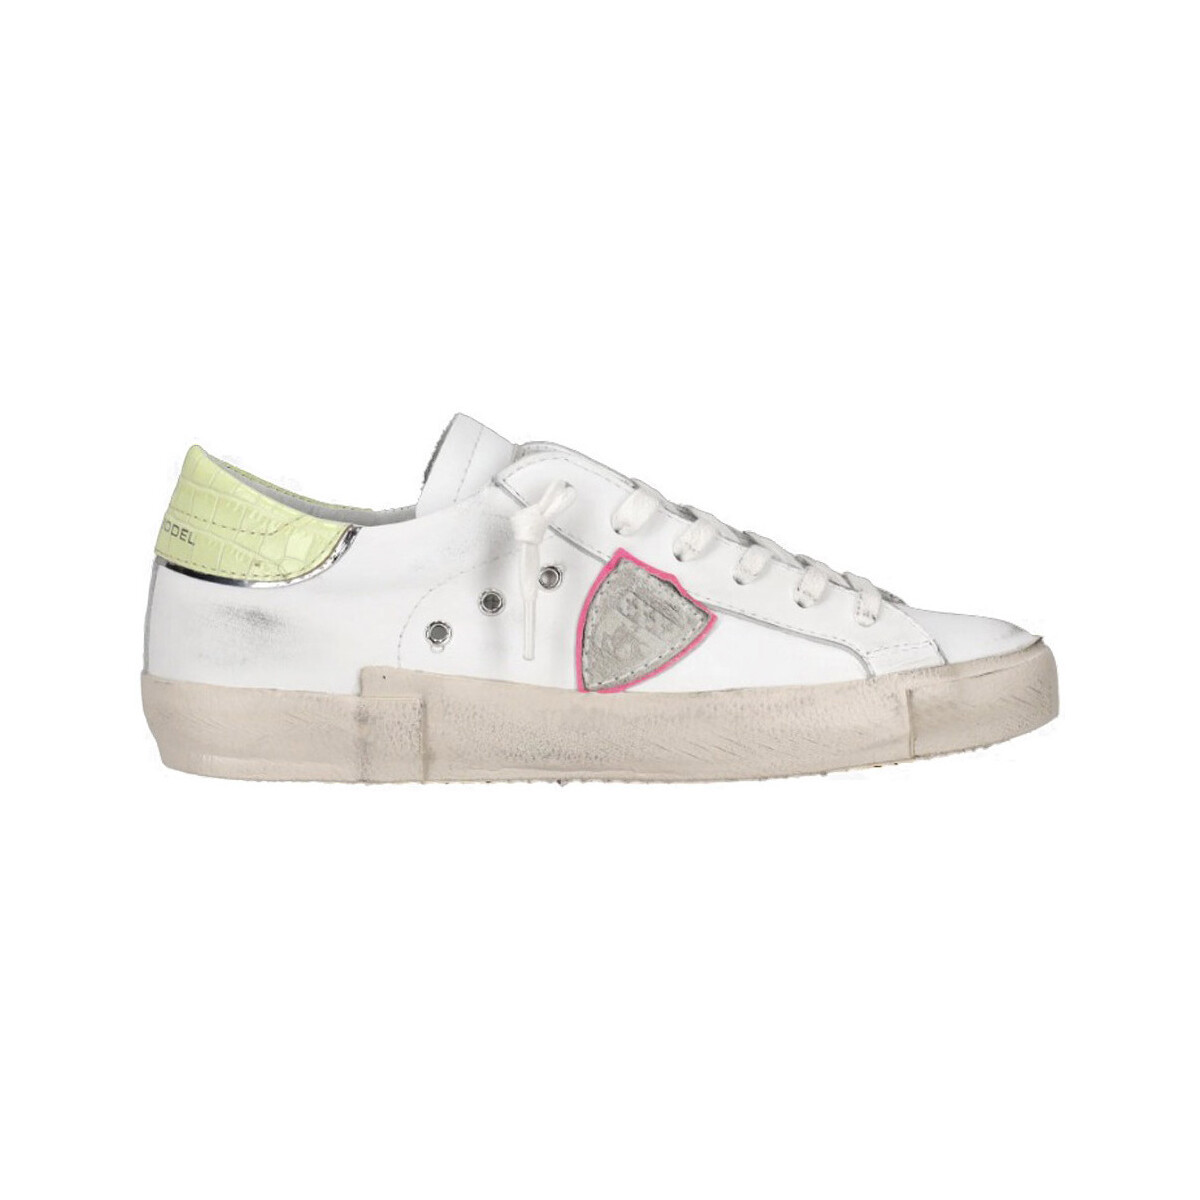 Chaussures Femme Baskets mode Philippe Model PRLD-VCP2 Blanc